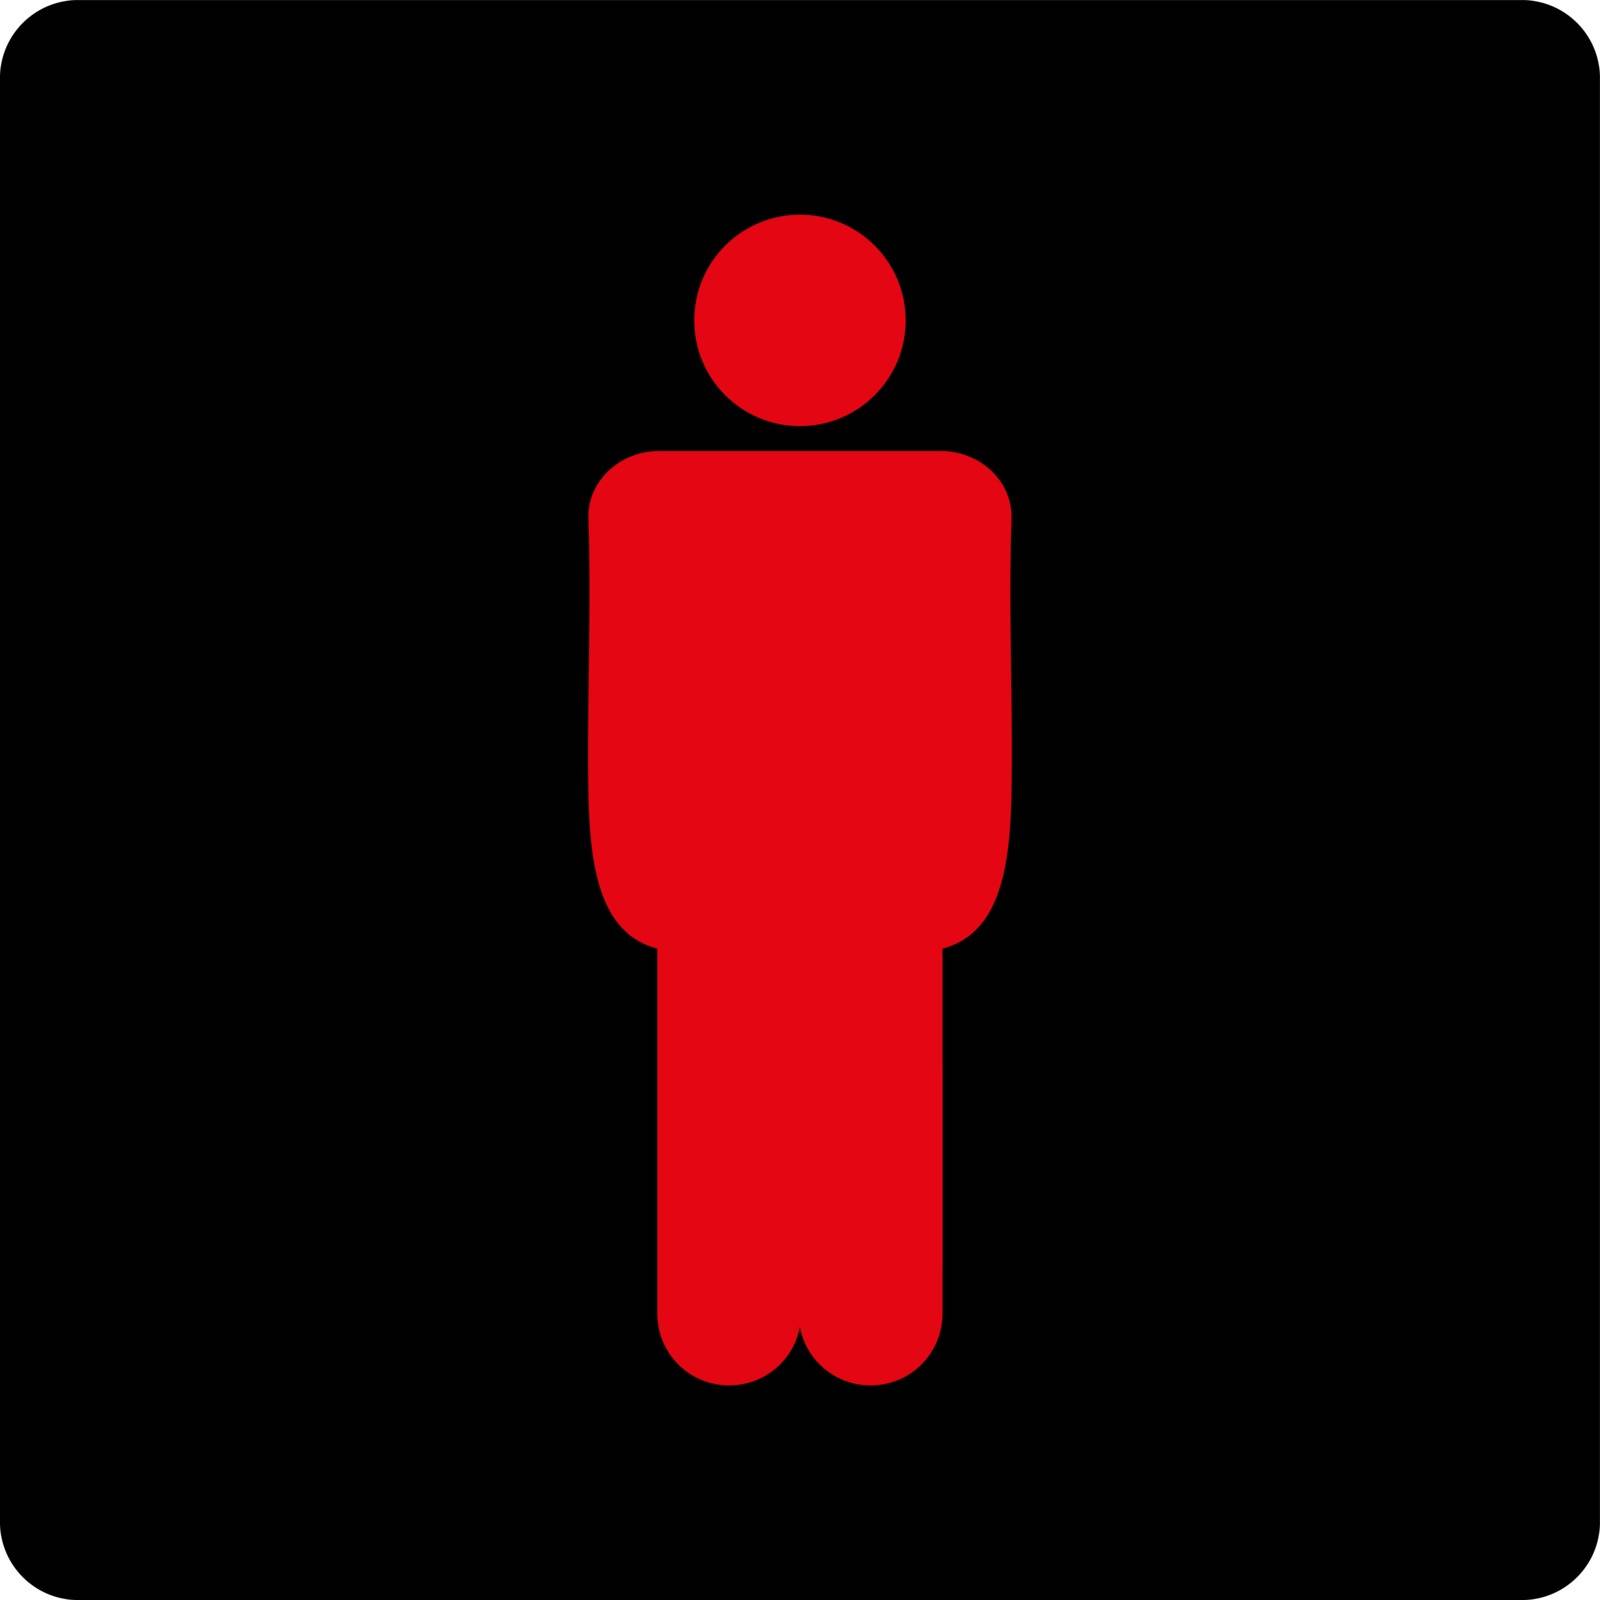 Man icon from Primitive Buttons OverColor Set. This rounded square flat button is drawn with intensive red and black colors on a white background.